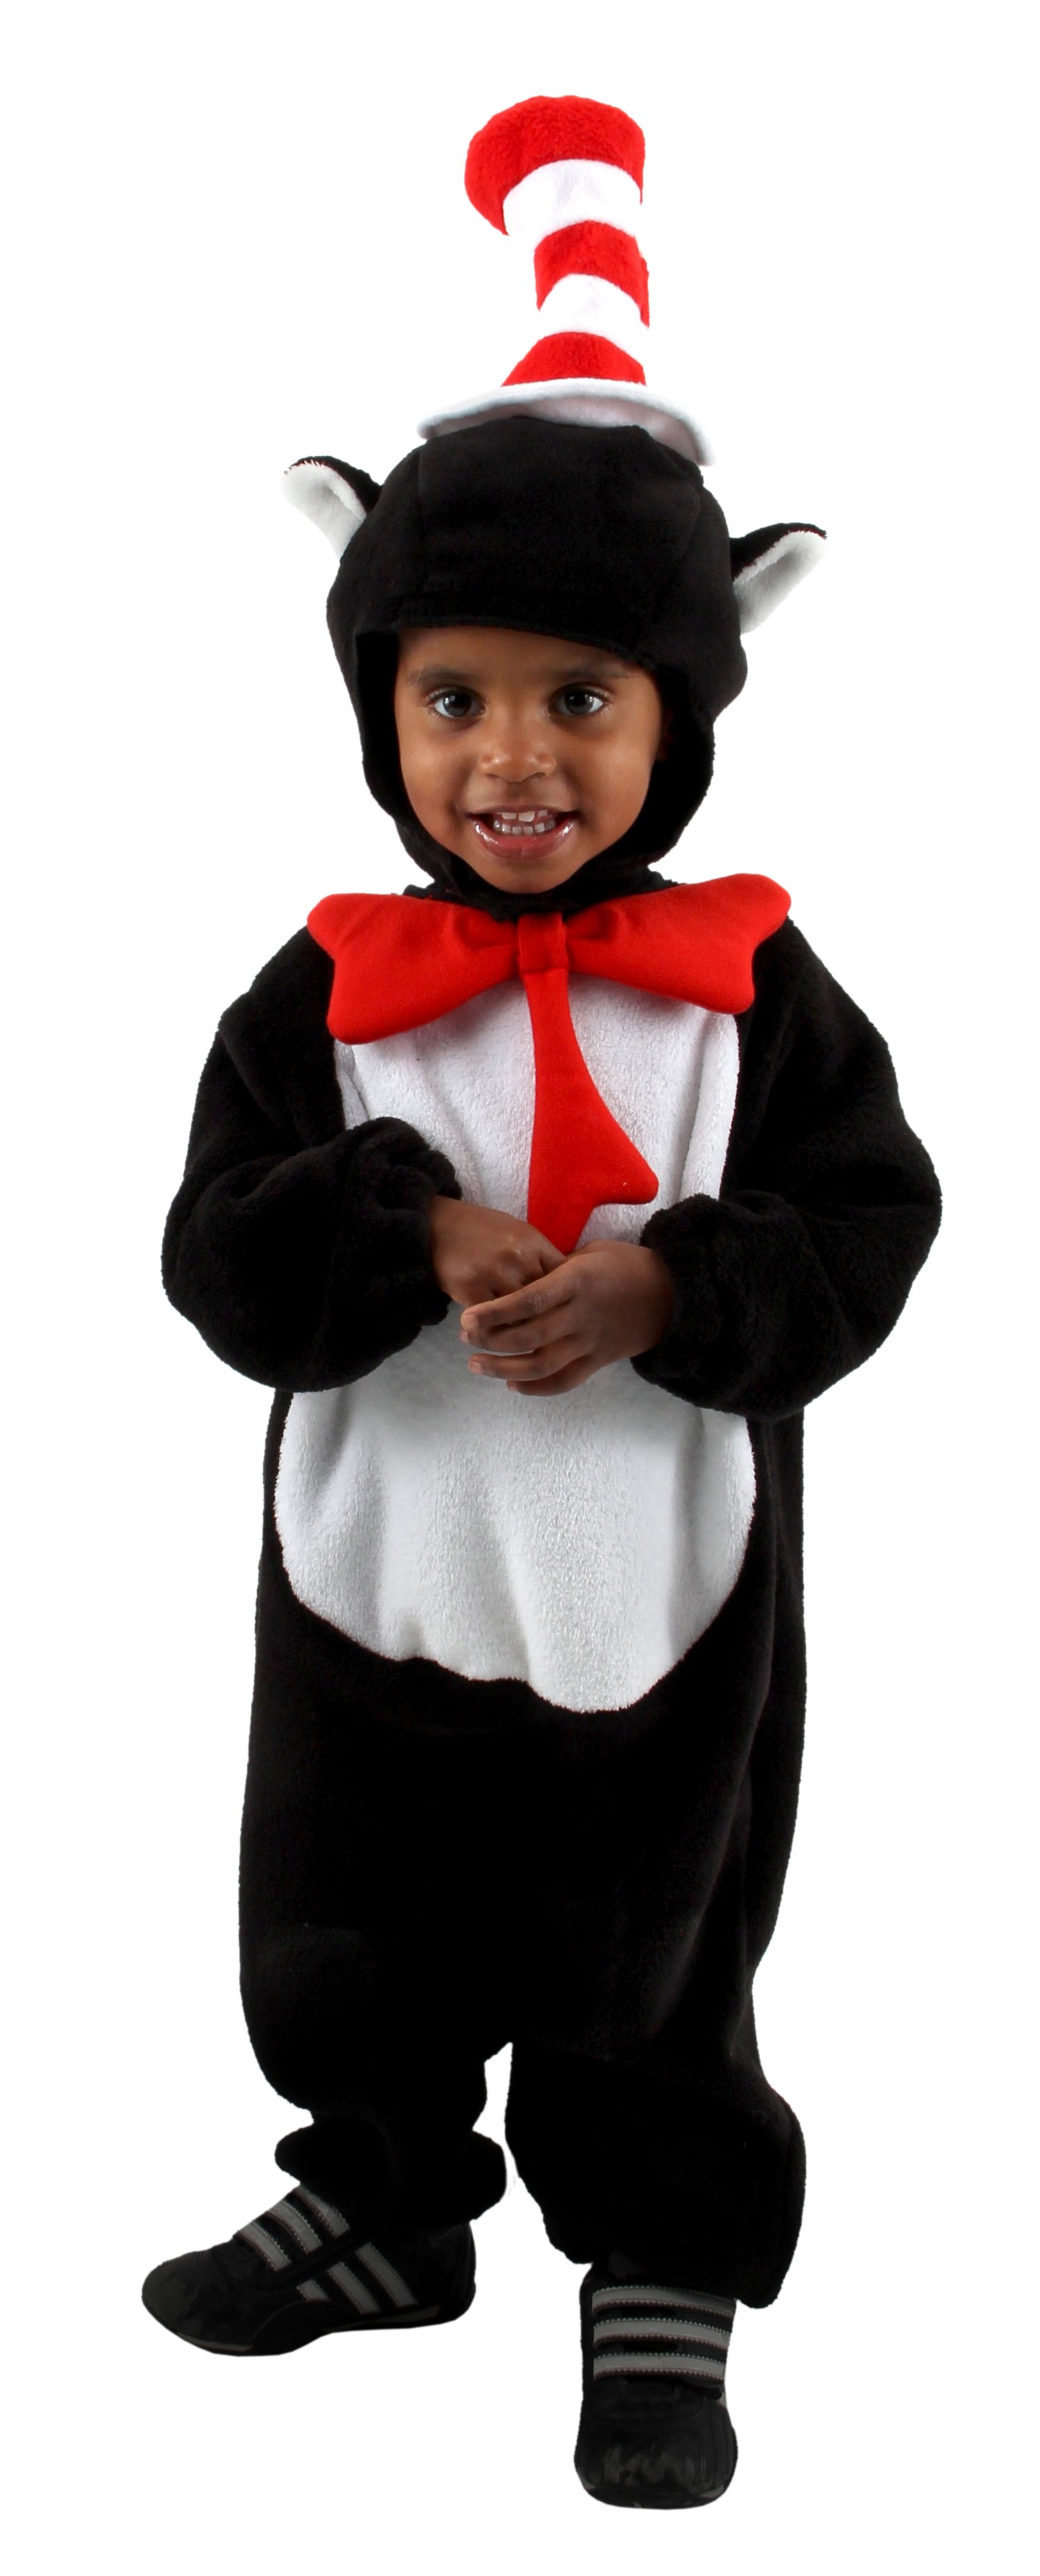 Dr. Seuss The Cat in the Hat - The Cat in the Hat Infant Costume